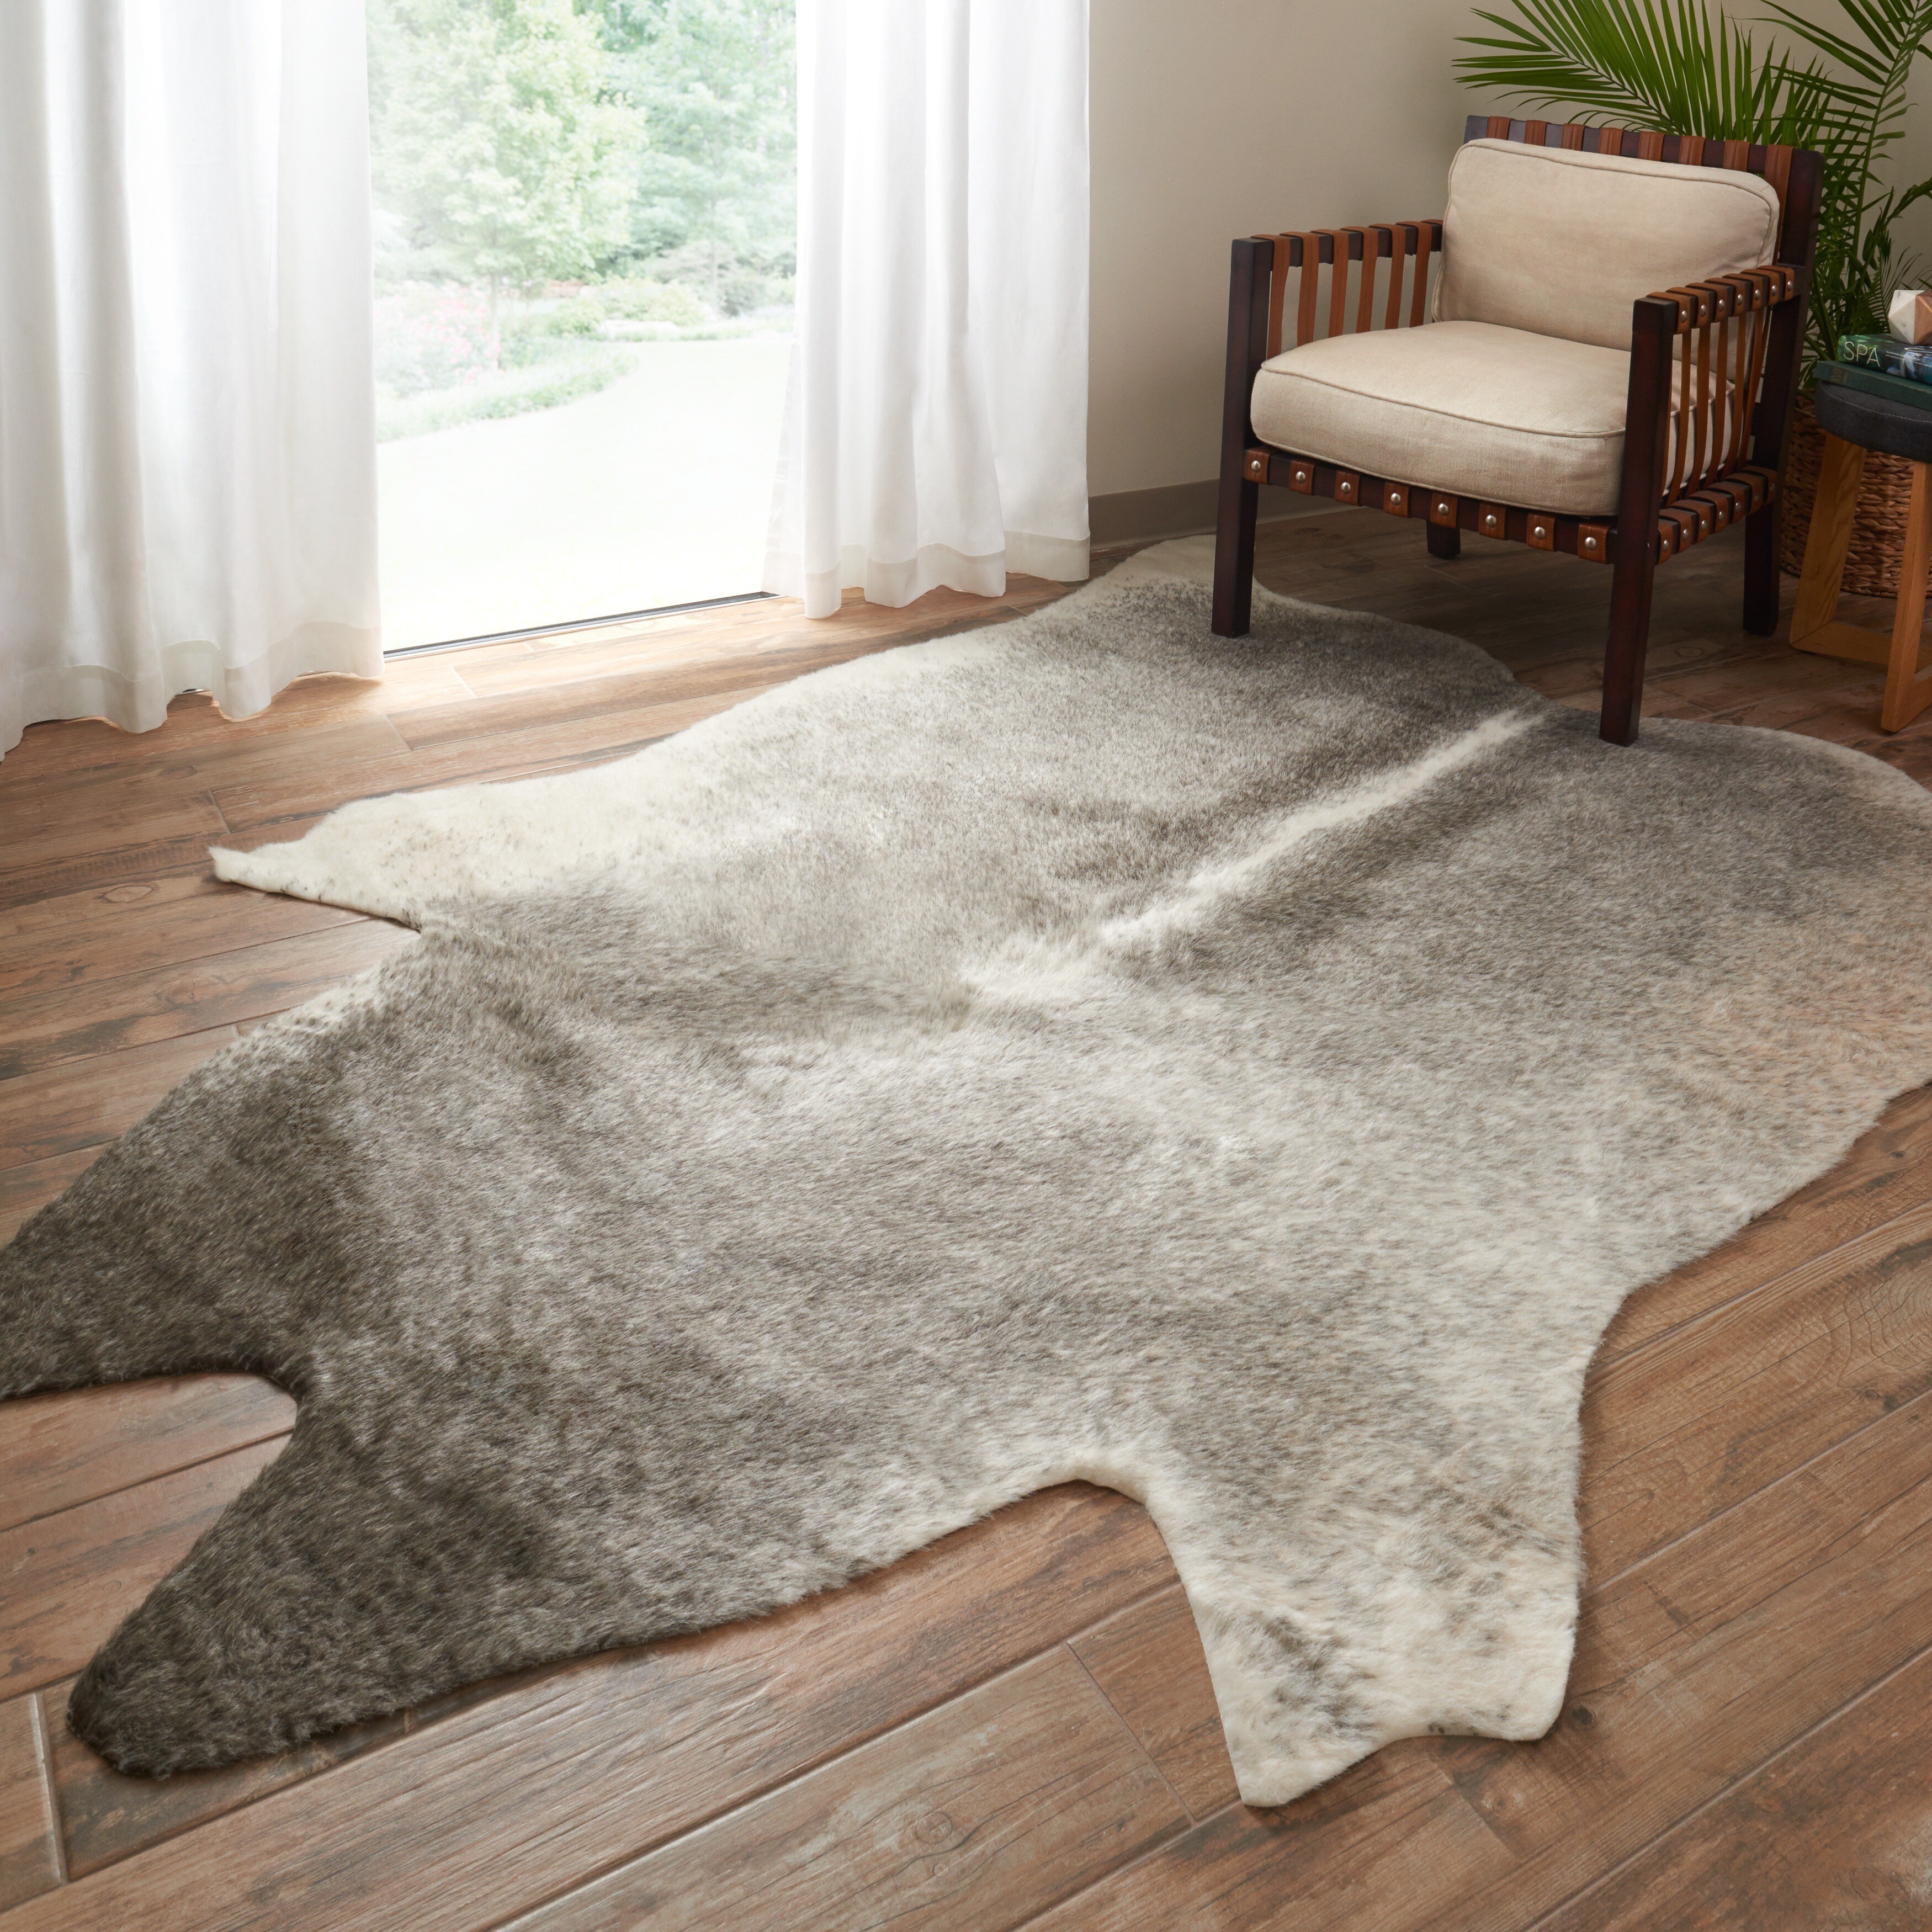 Shop Faux Cowhide Area Rug 3 Size Options On Sale Overstock